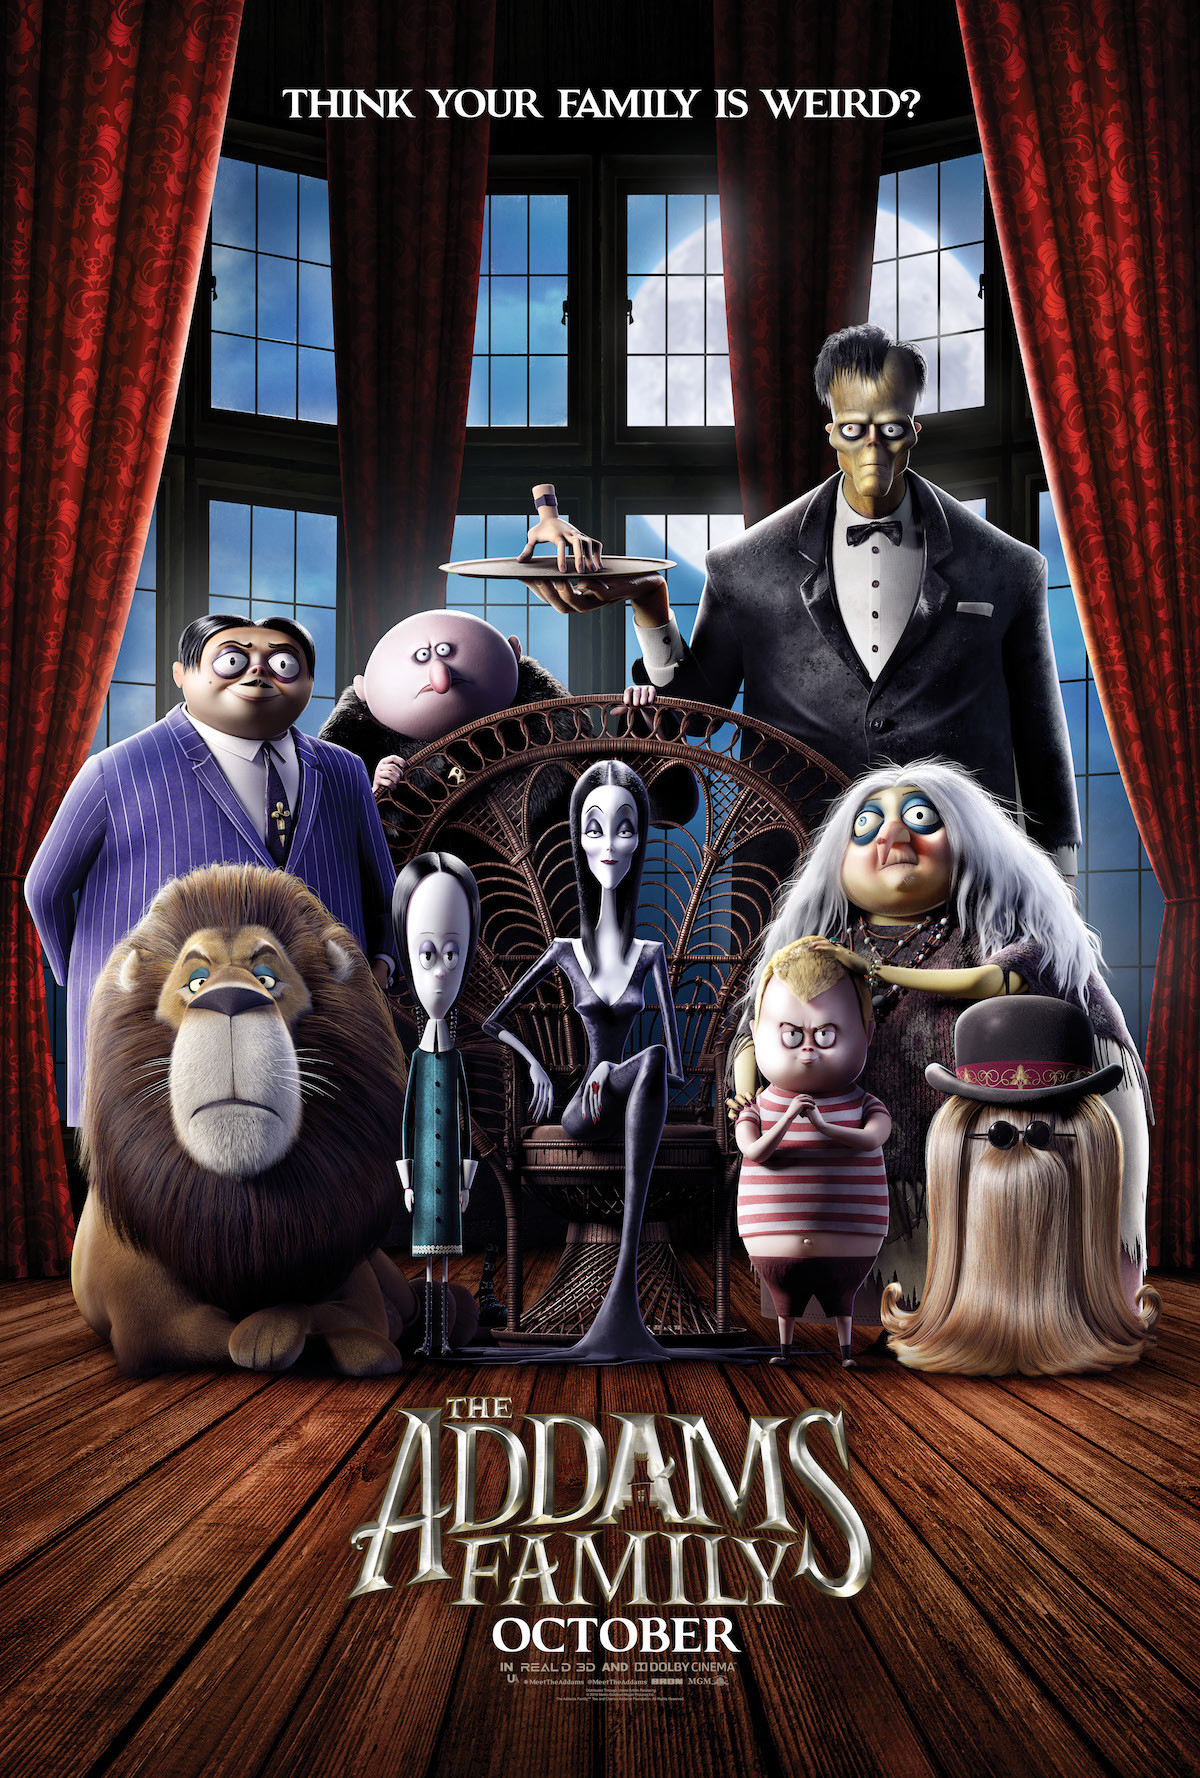 The Addams Family (2019) Reviews - Metacritic